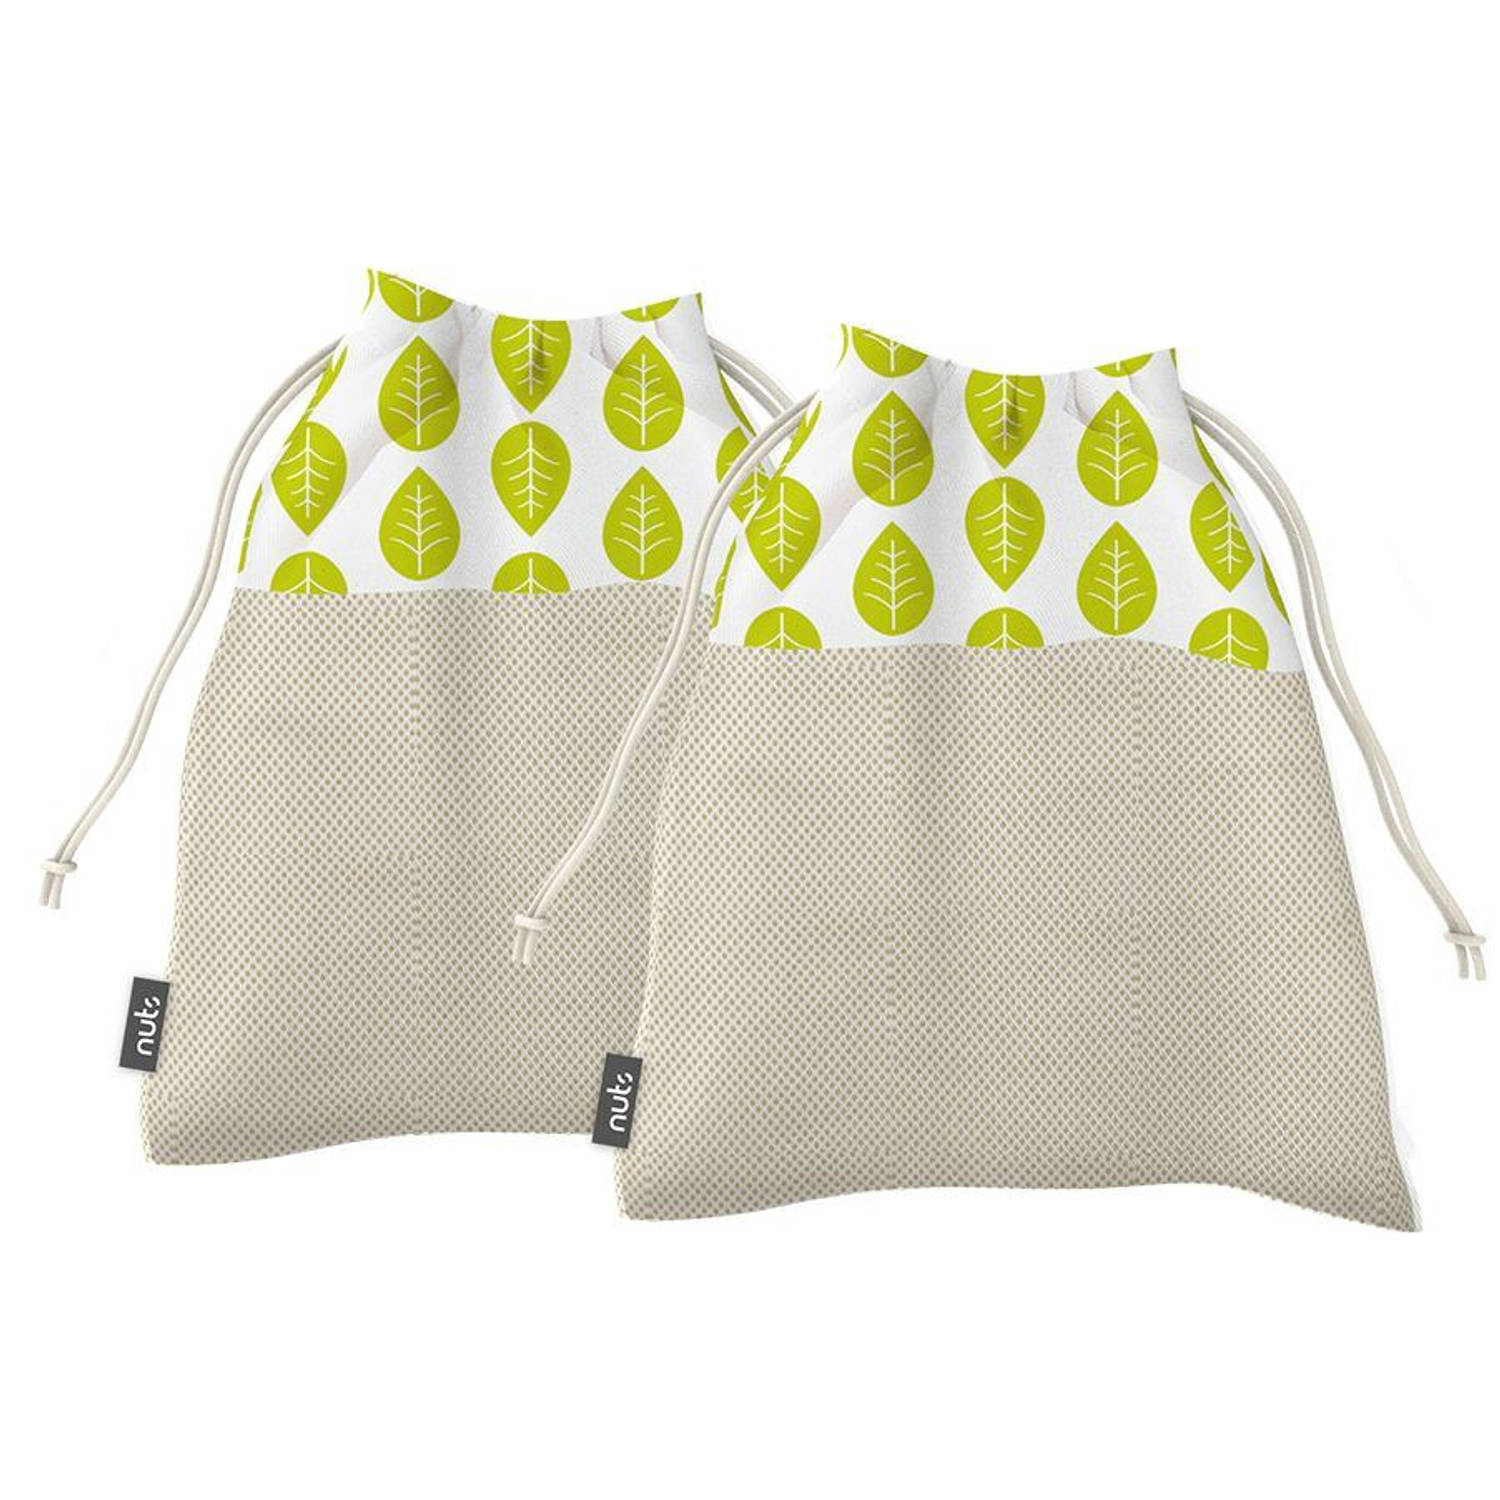 Bee's Wax - Leaves Mesh Produce Bags Set of 2 Small